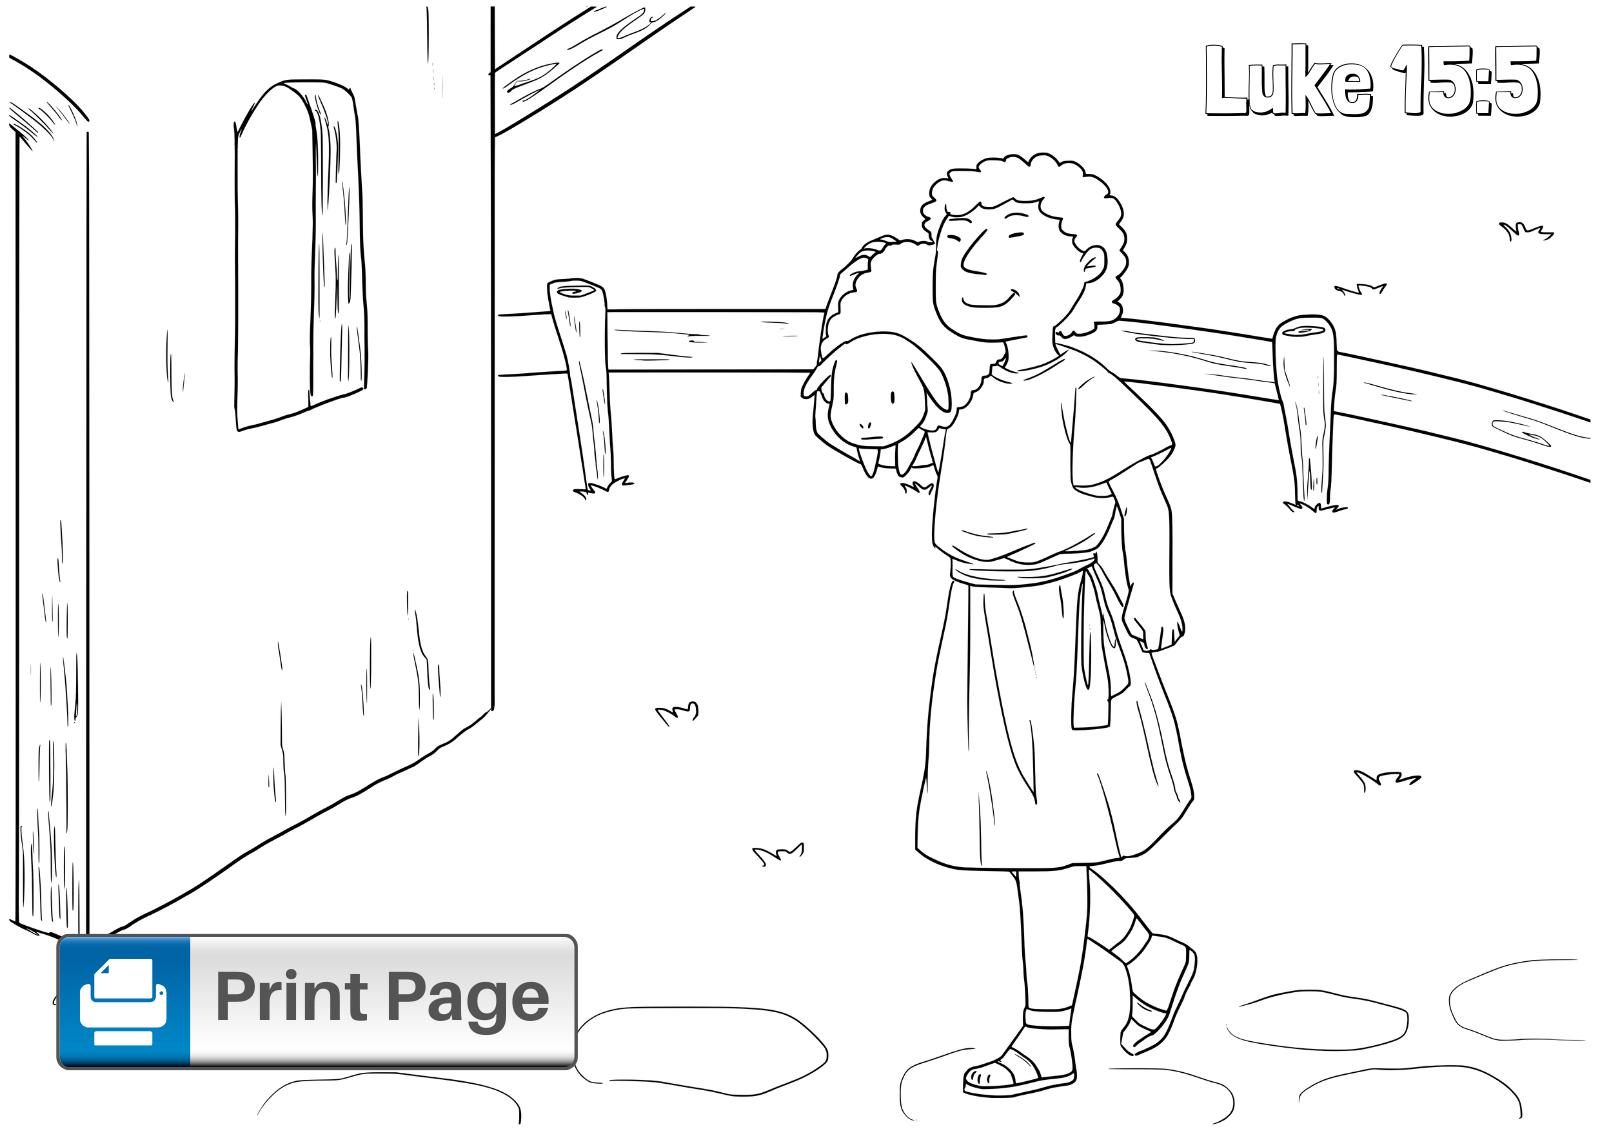 The Lost Sheep Coloring Page